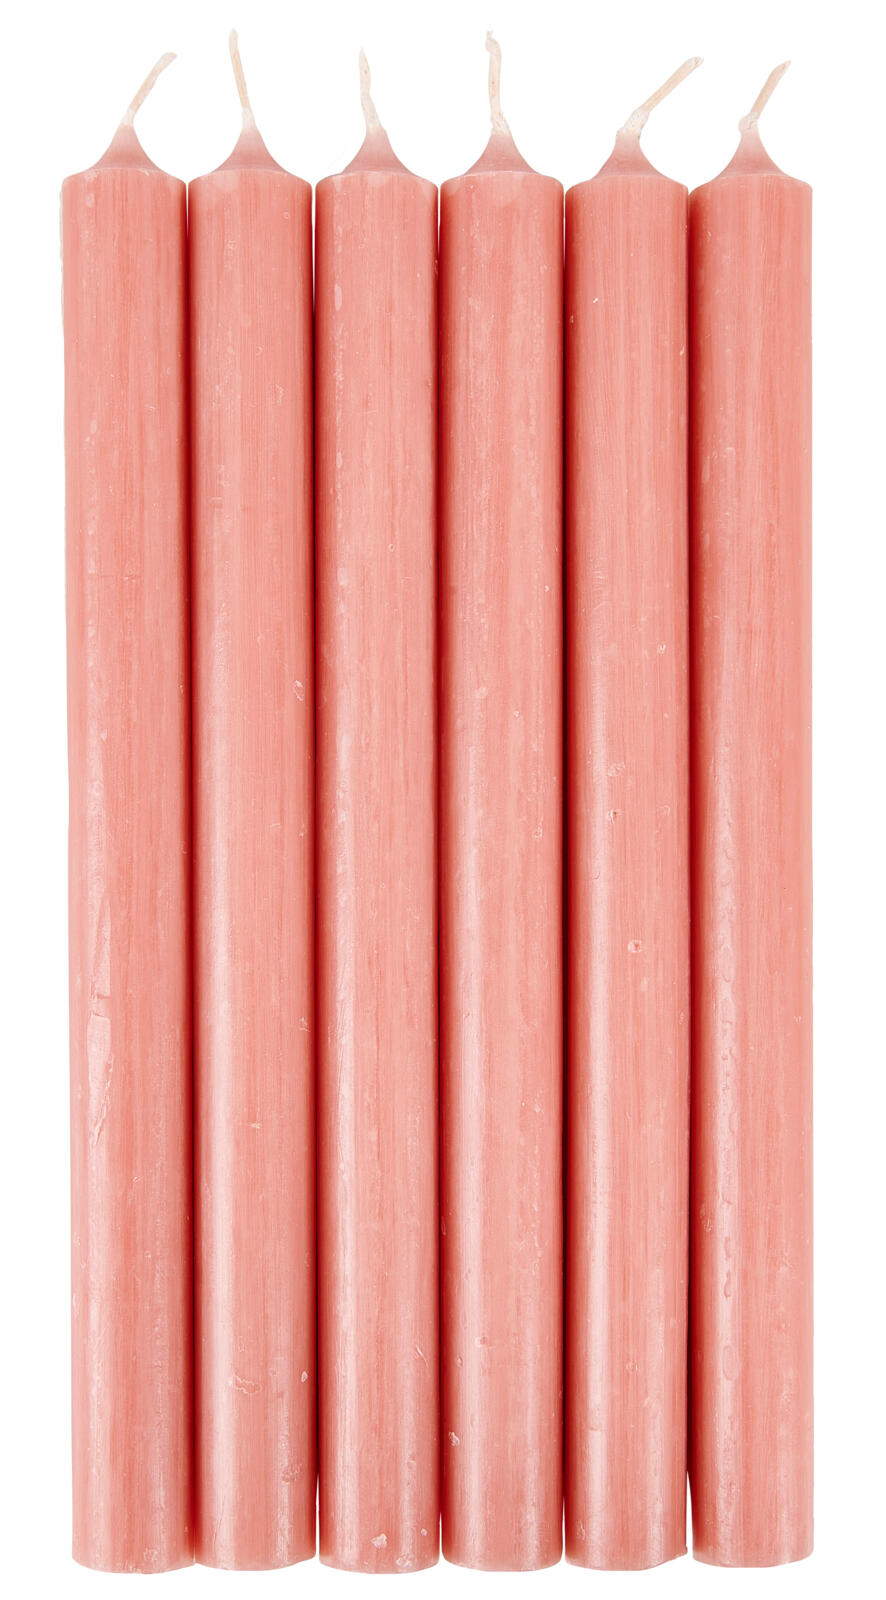 FINA S/6 CANDLES PINK